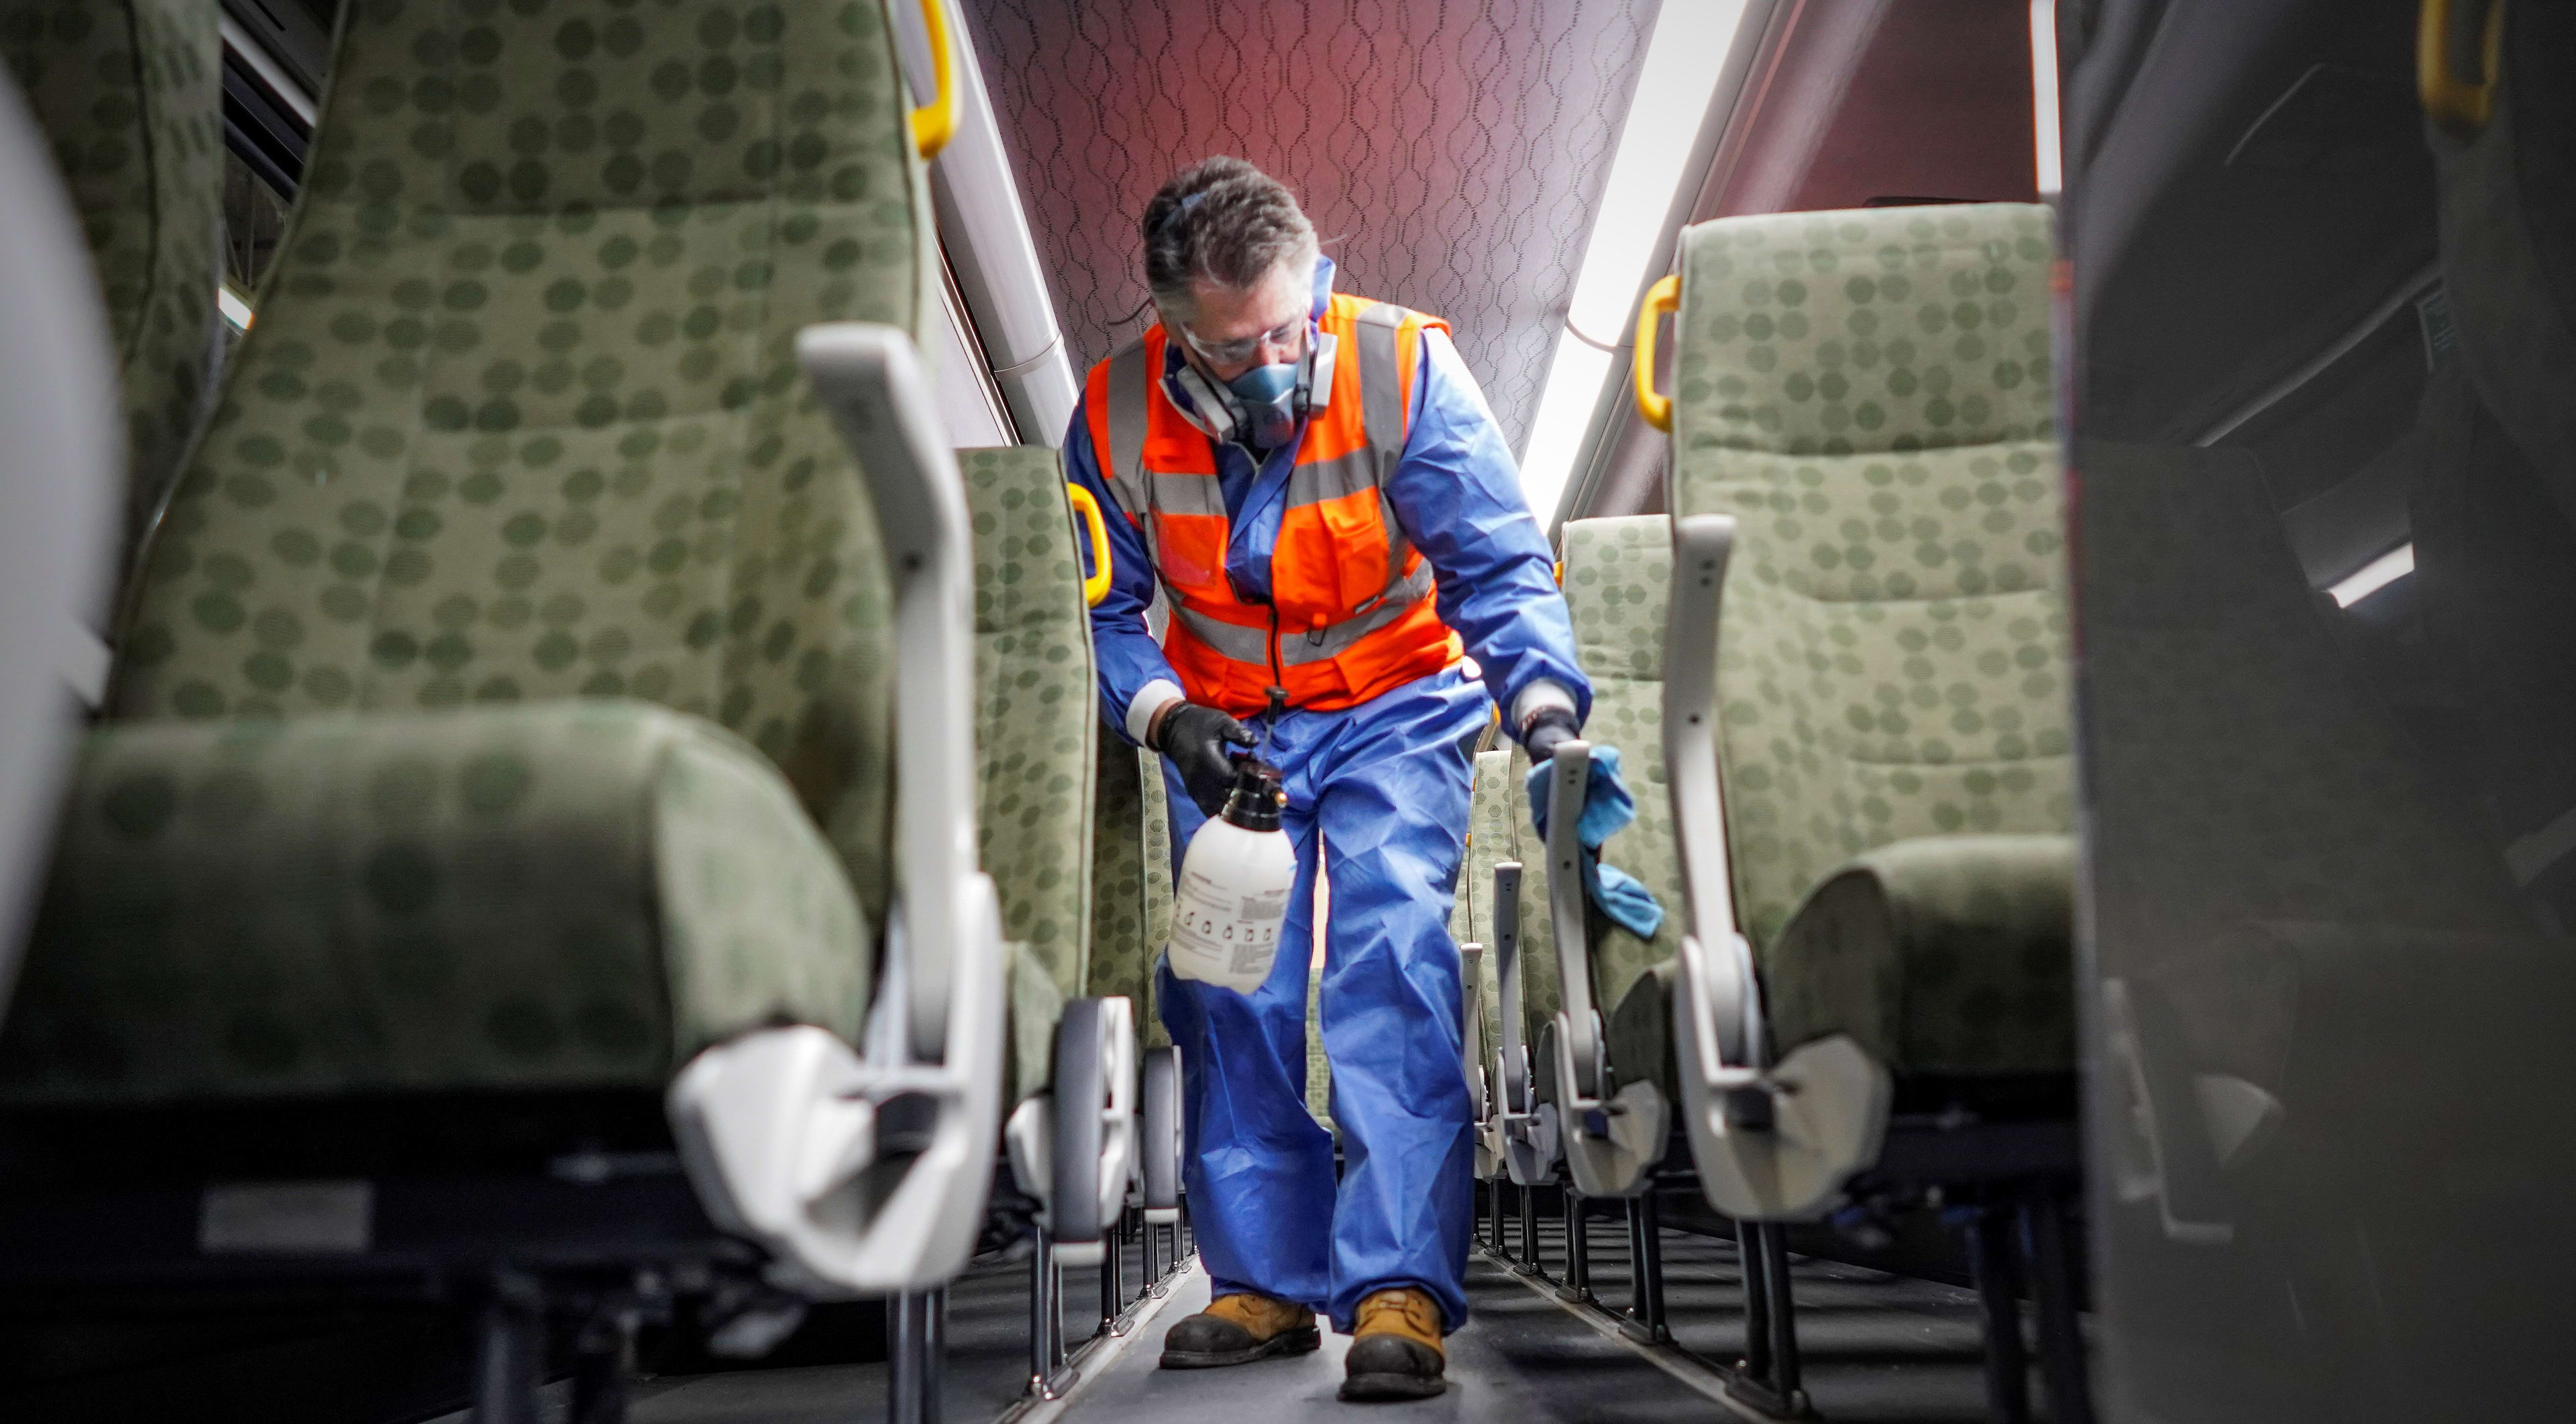 A man wipes down GO bus seats.